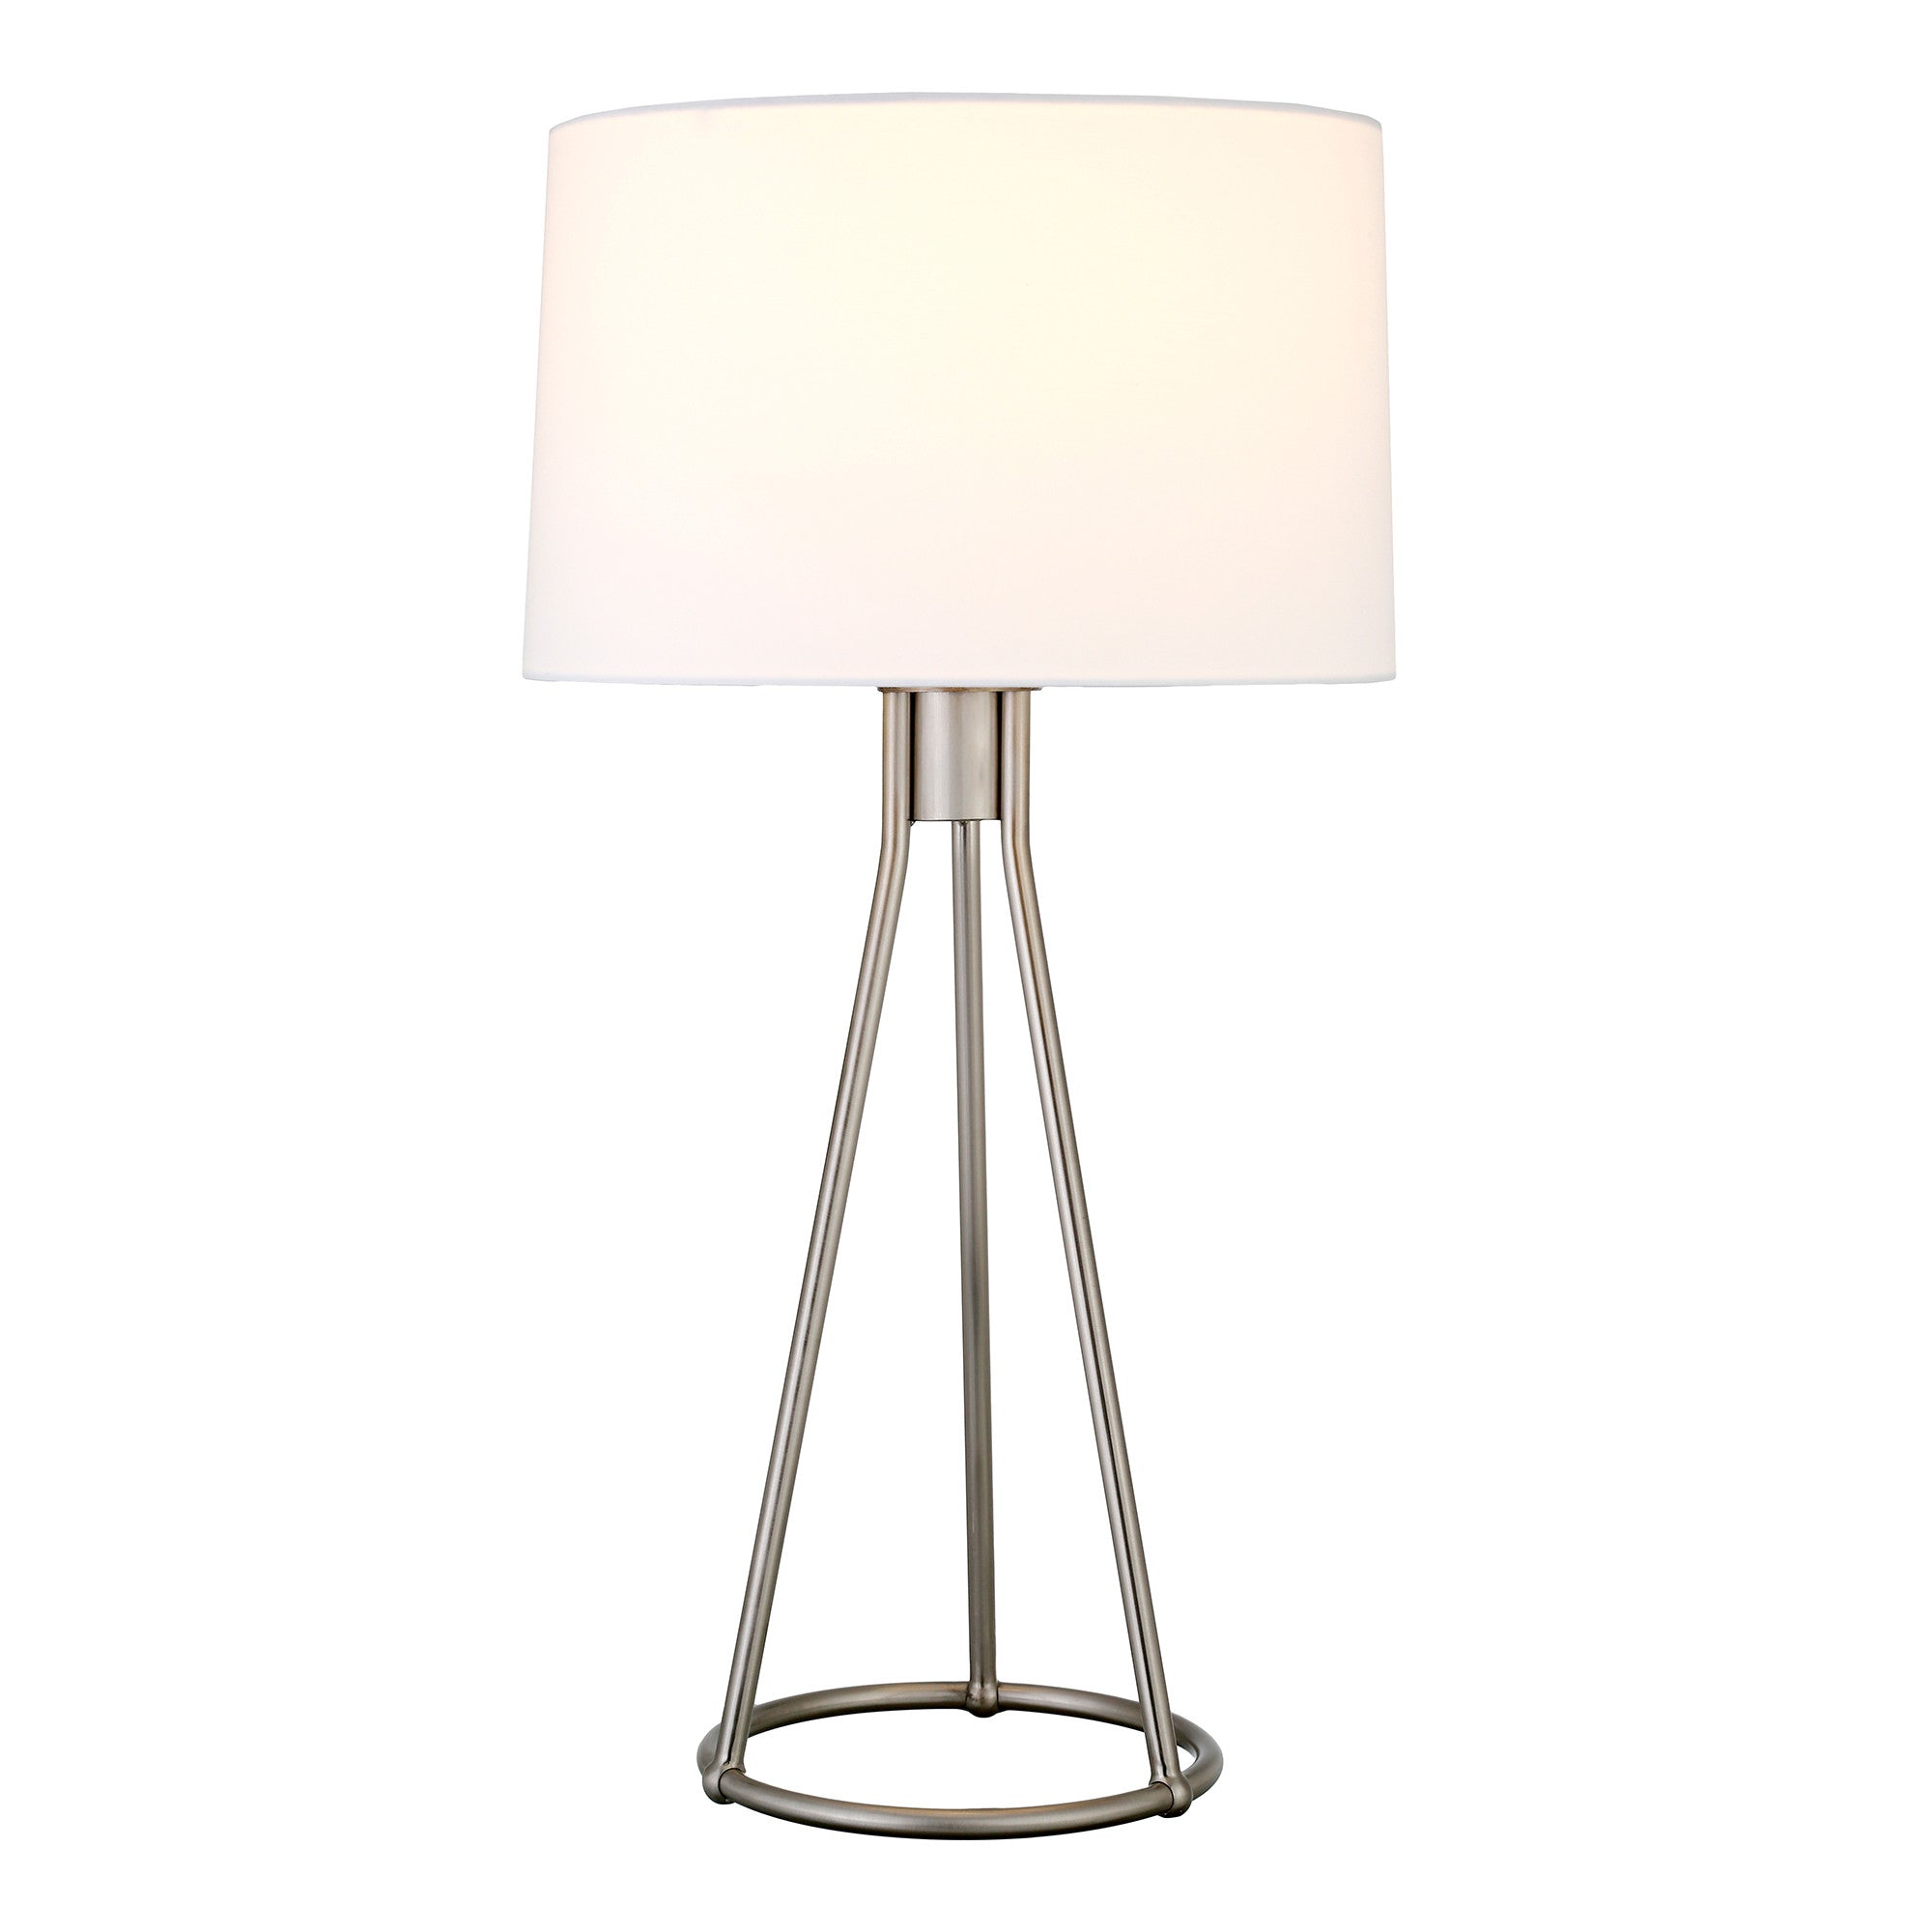 28" Nickel Metal Table Lamp With White Drum Shade